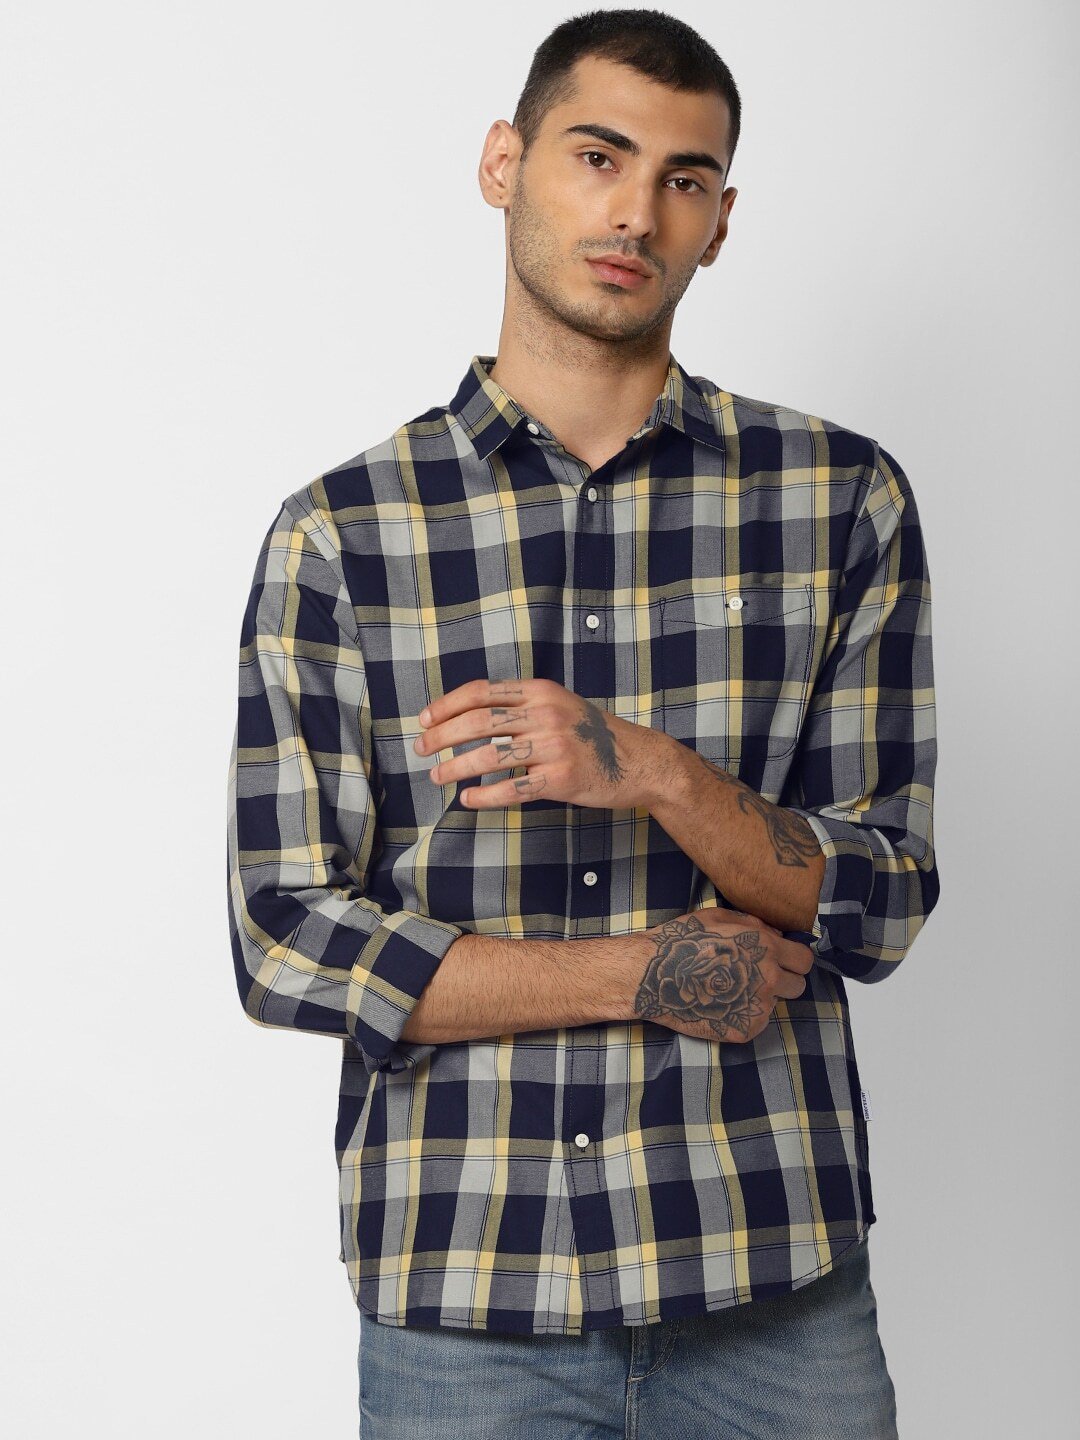 Men Yellow & Navy Blue Slim Fit Checked Casual Shirt-2081401010 - Discount Store